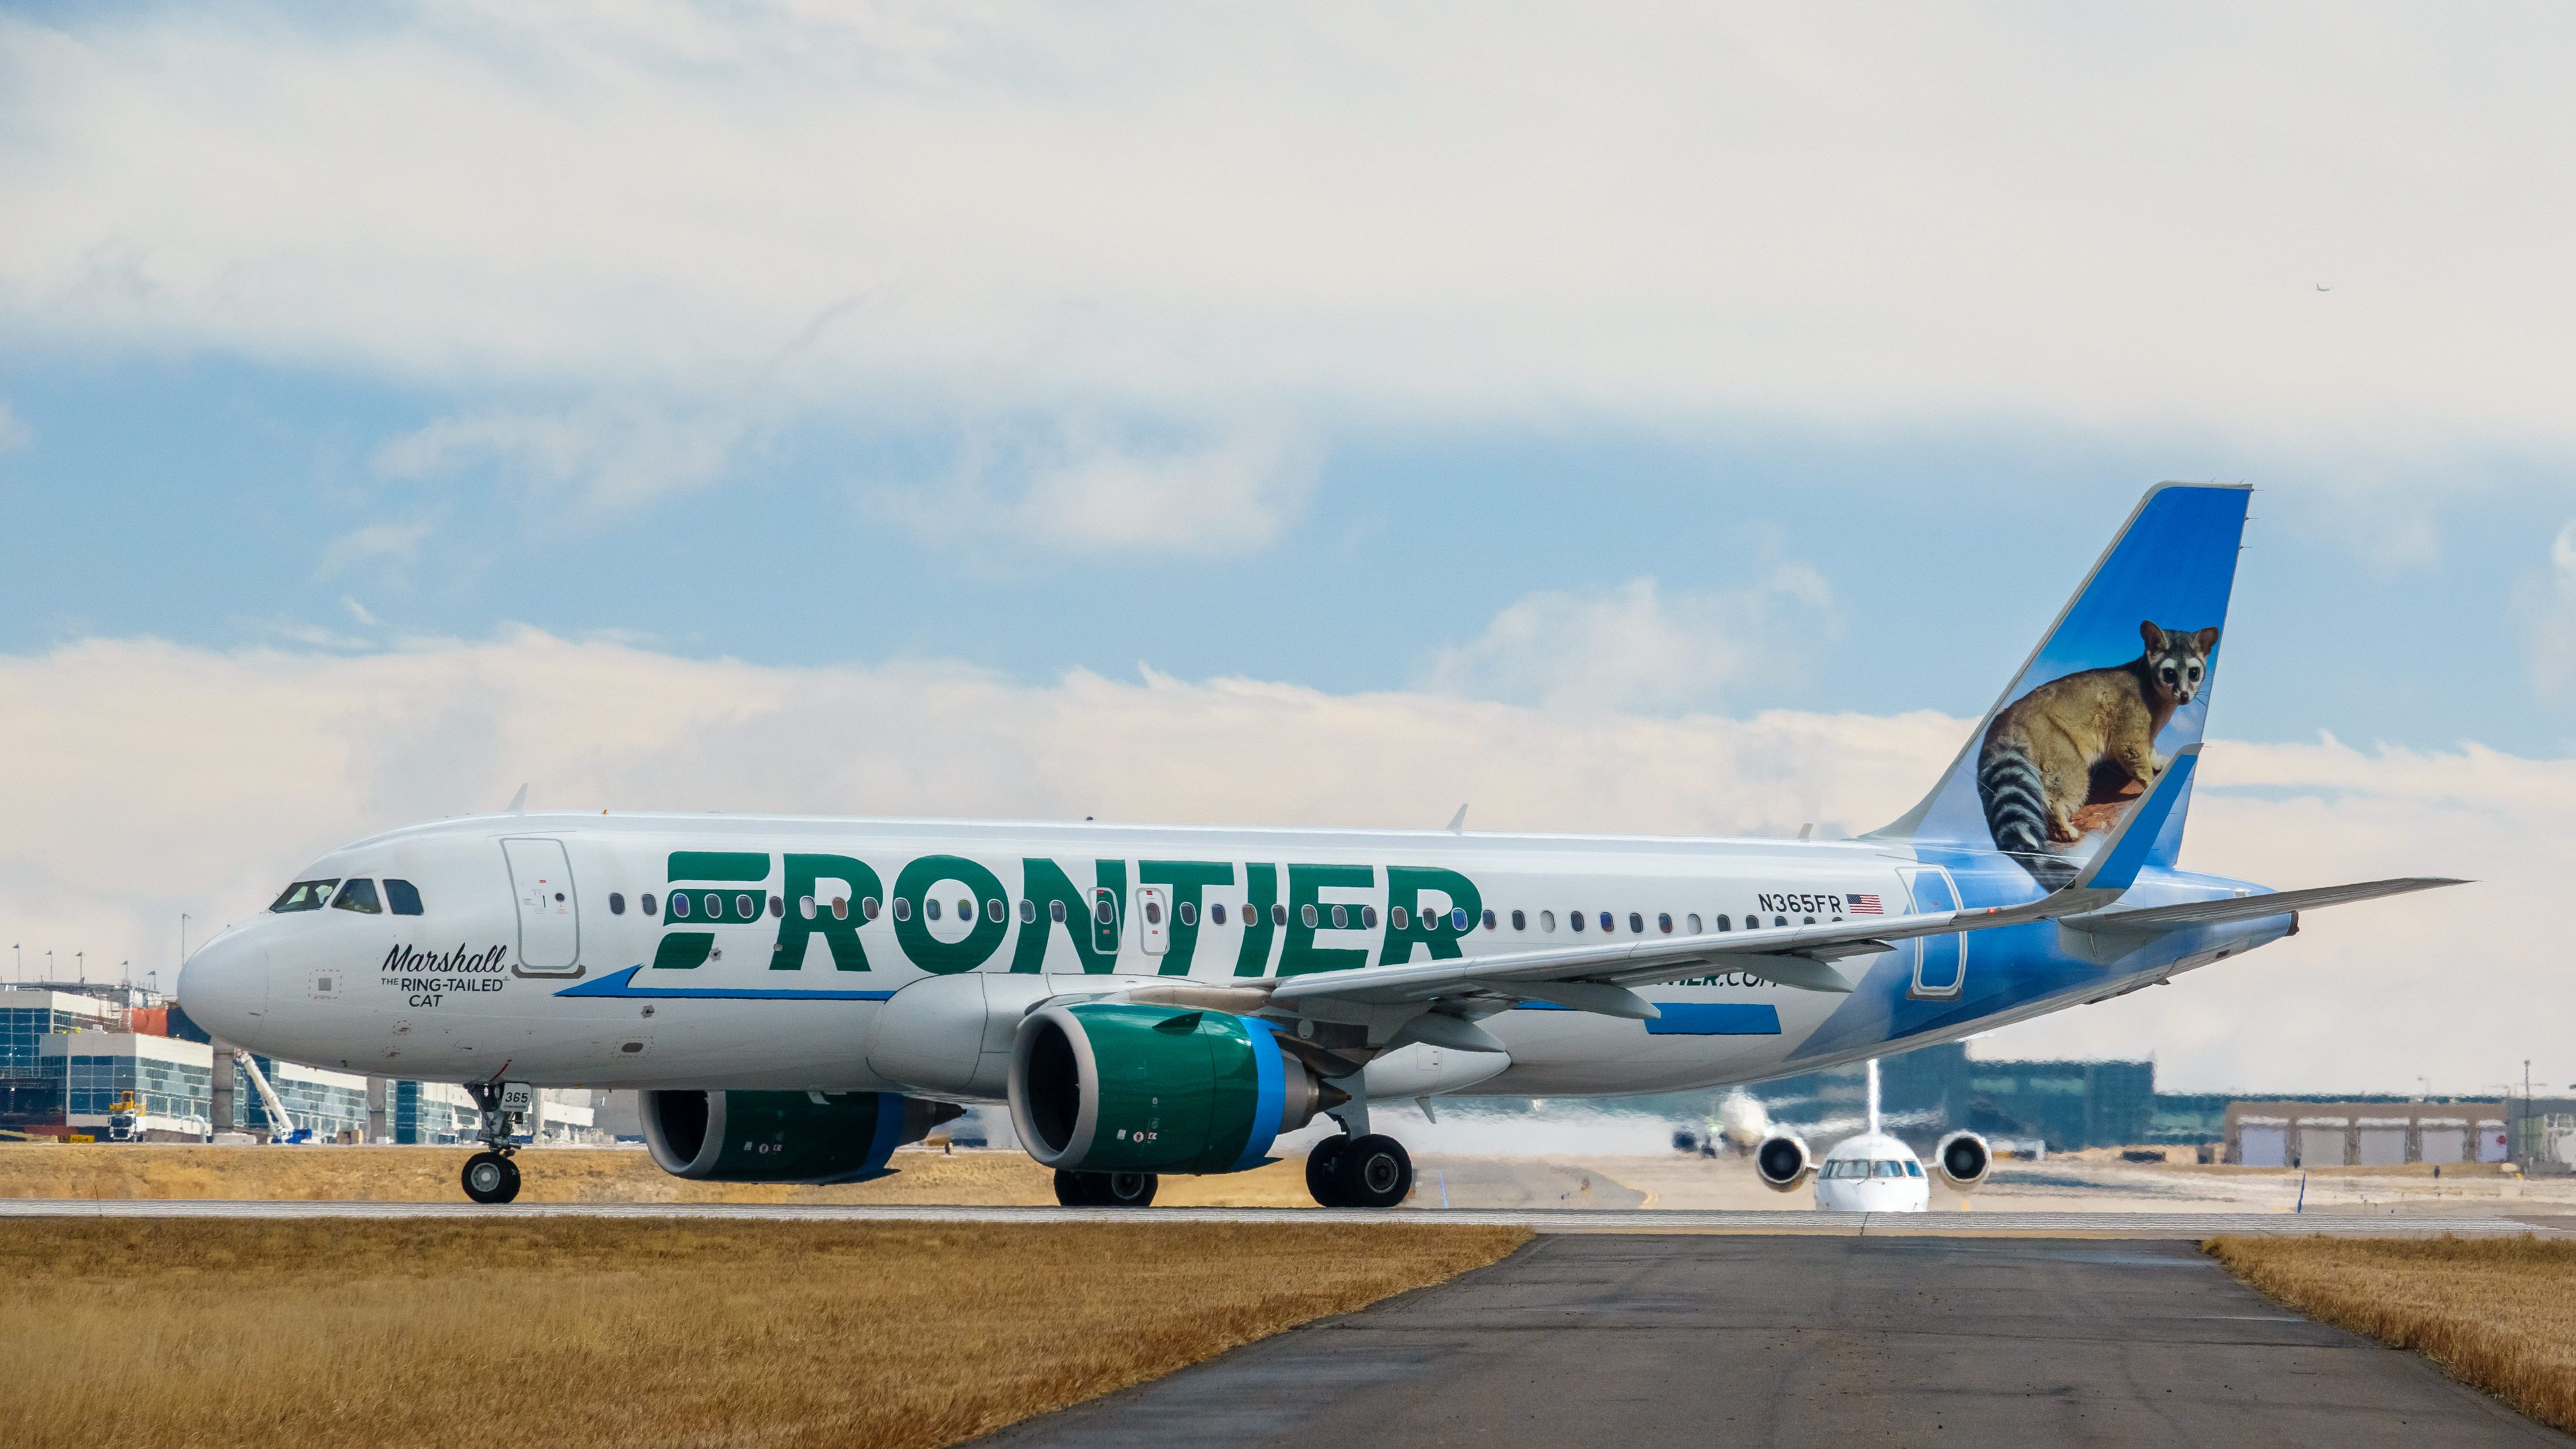 A Frontier Airlines plane gets ready for takeoff